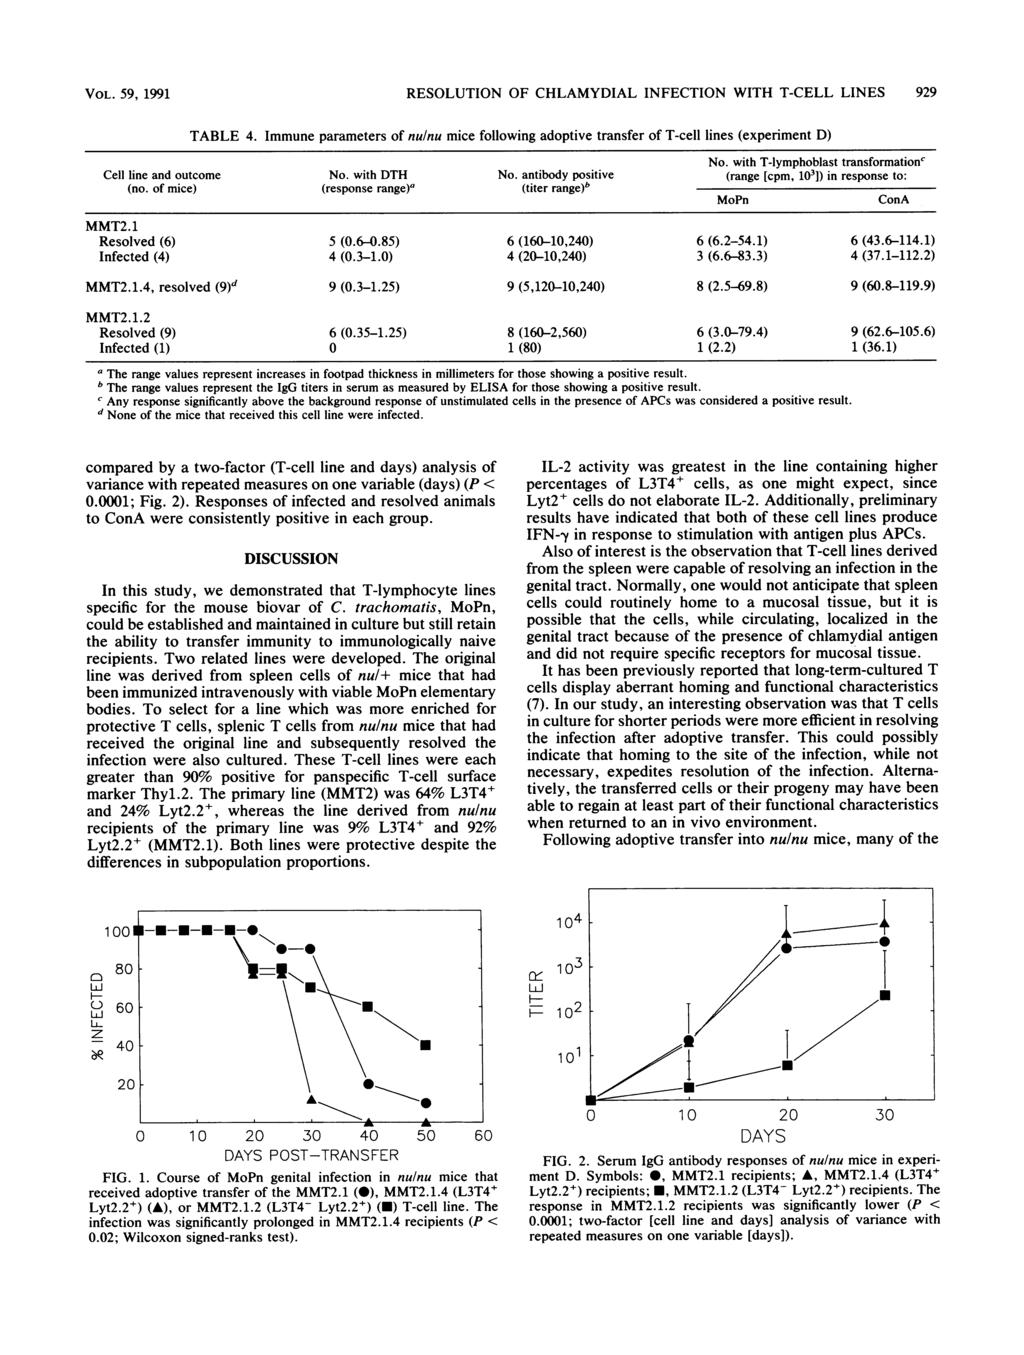 VOL. 59, 1991 RESOLUTION OF CHLAMYDIAL INFECTION WITH T-CELL LINES 929 TABLE 4. Immune parameters of nulnu mice following adoptive transfer of T-cell lines (experiment D) No.